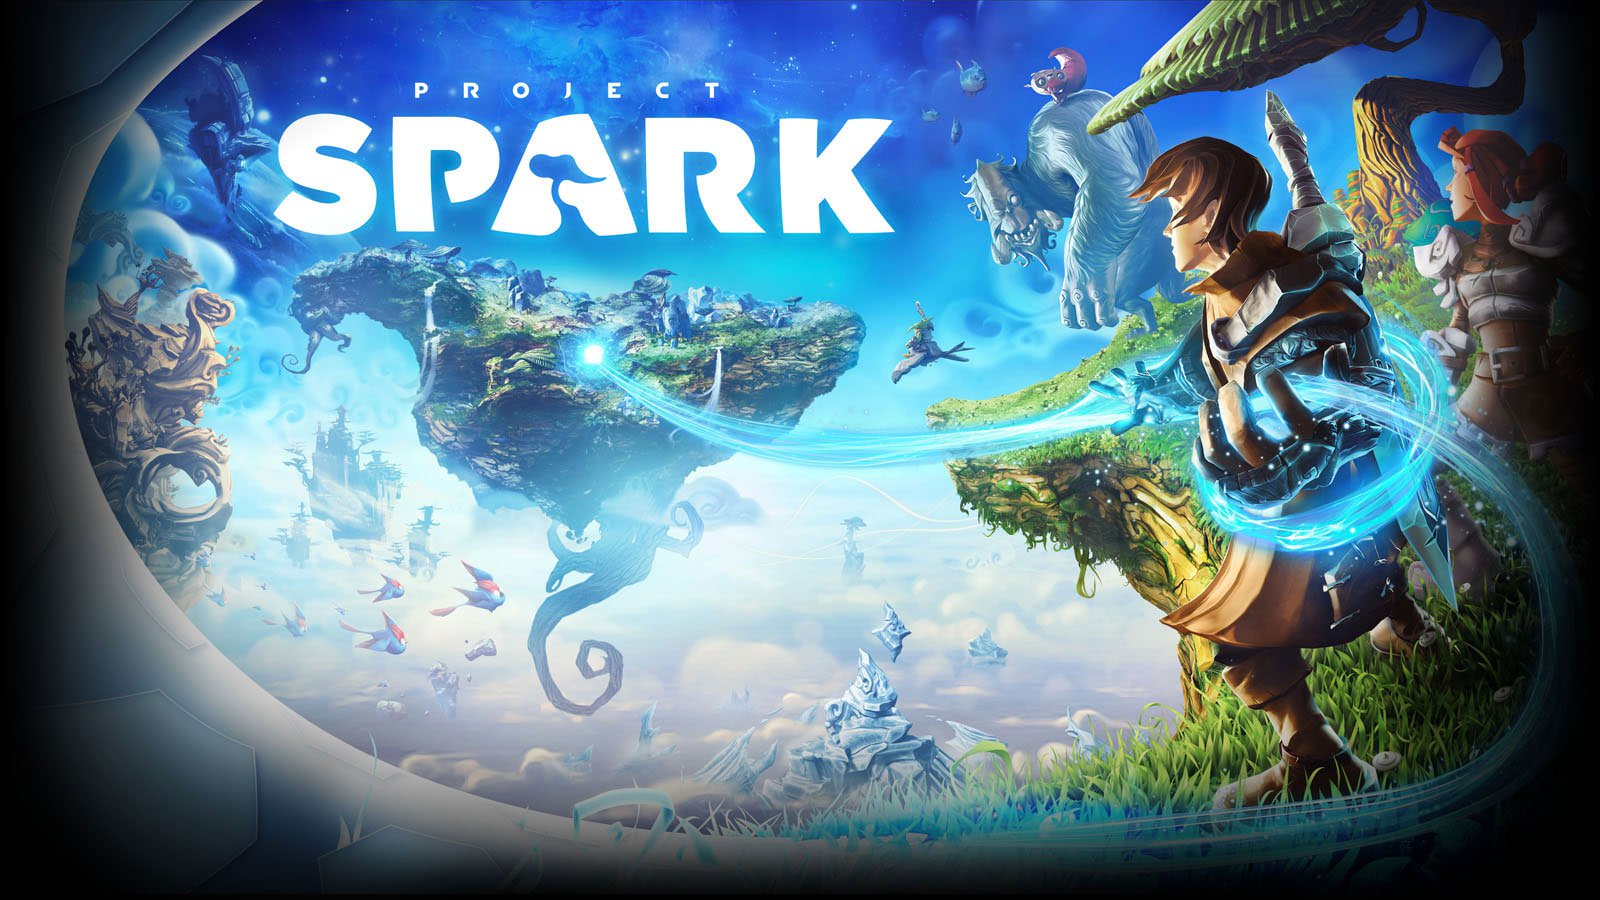 Project Spark to be out of beta on October 7 will be available on 1600x900